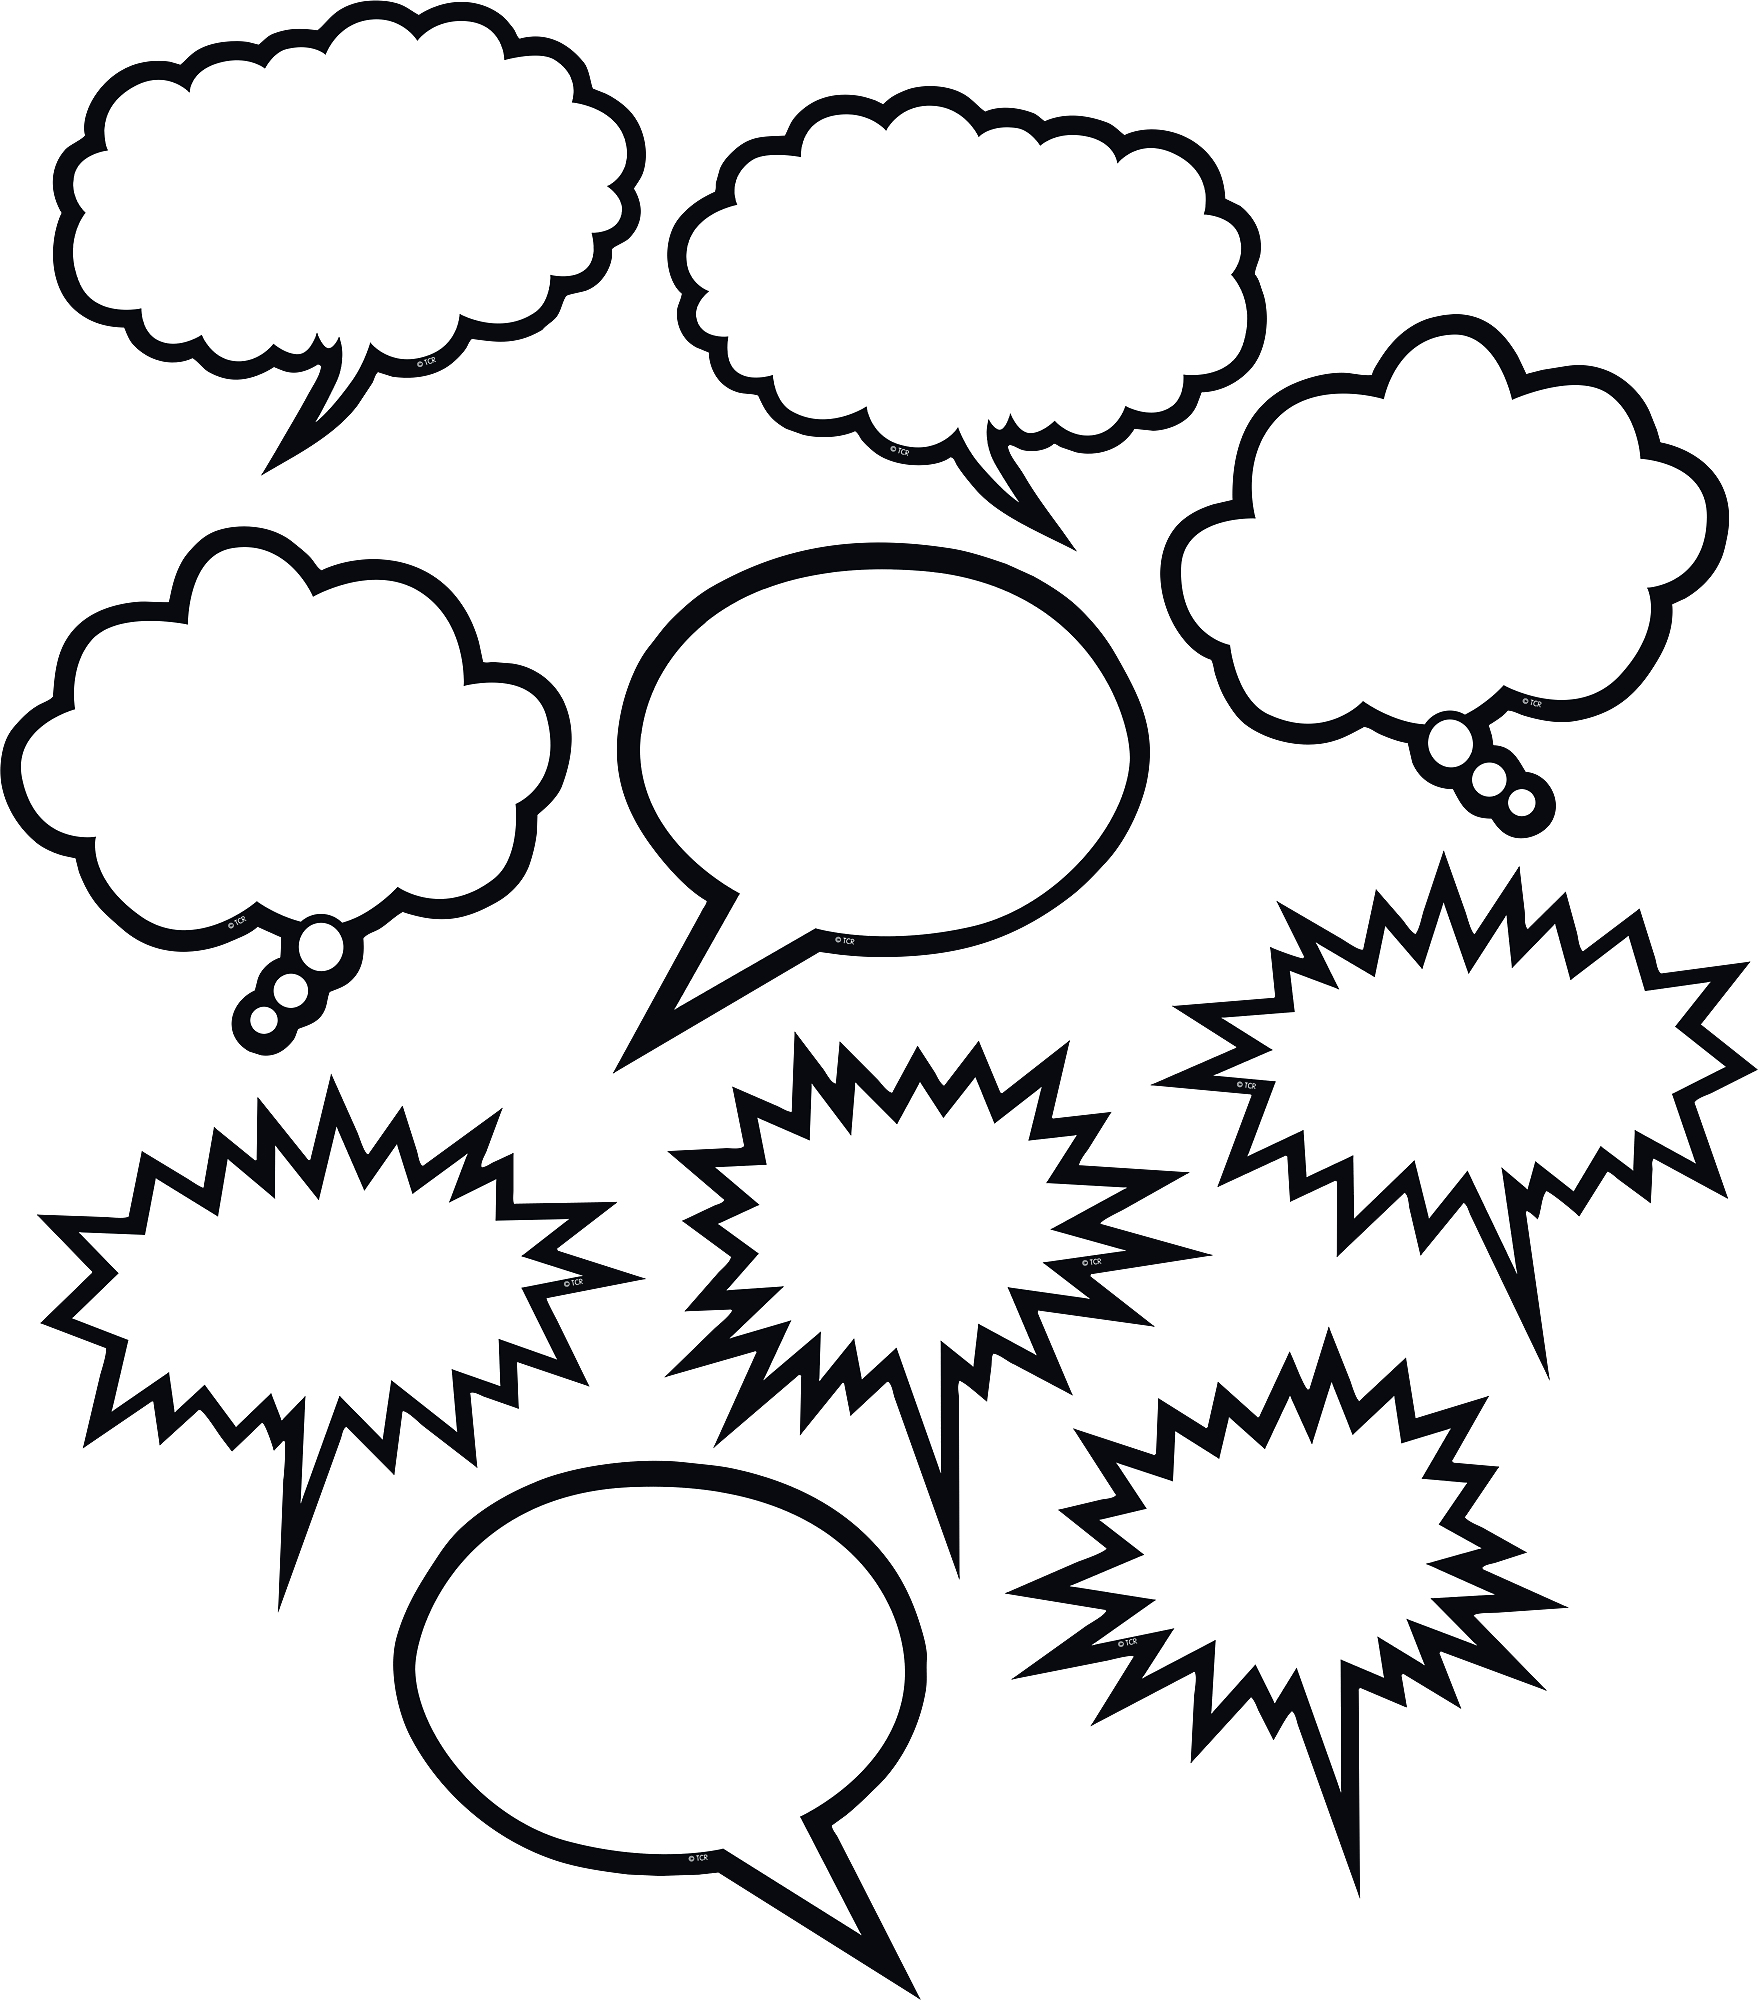 Black & White Speech/Thought Bubbles Accents